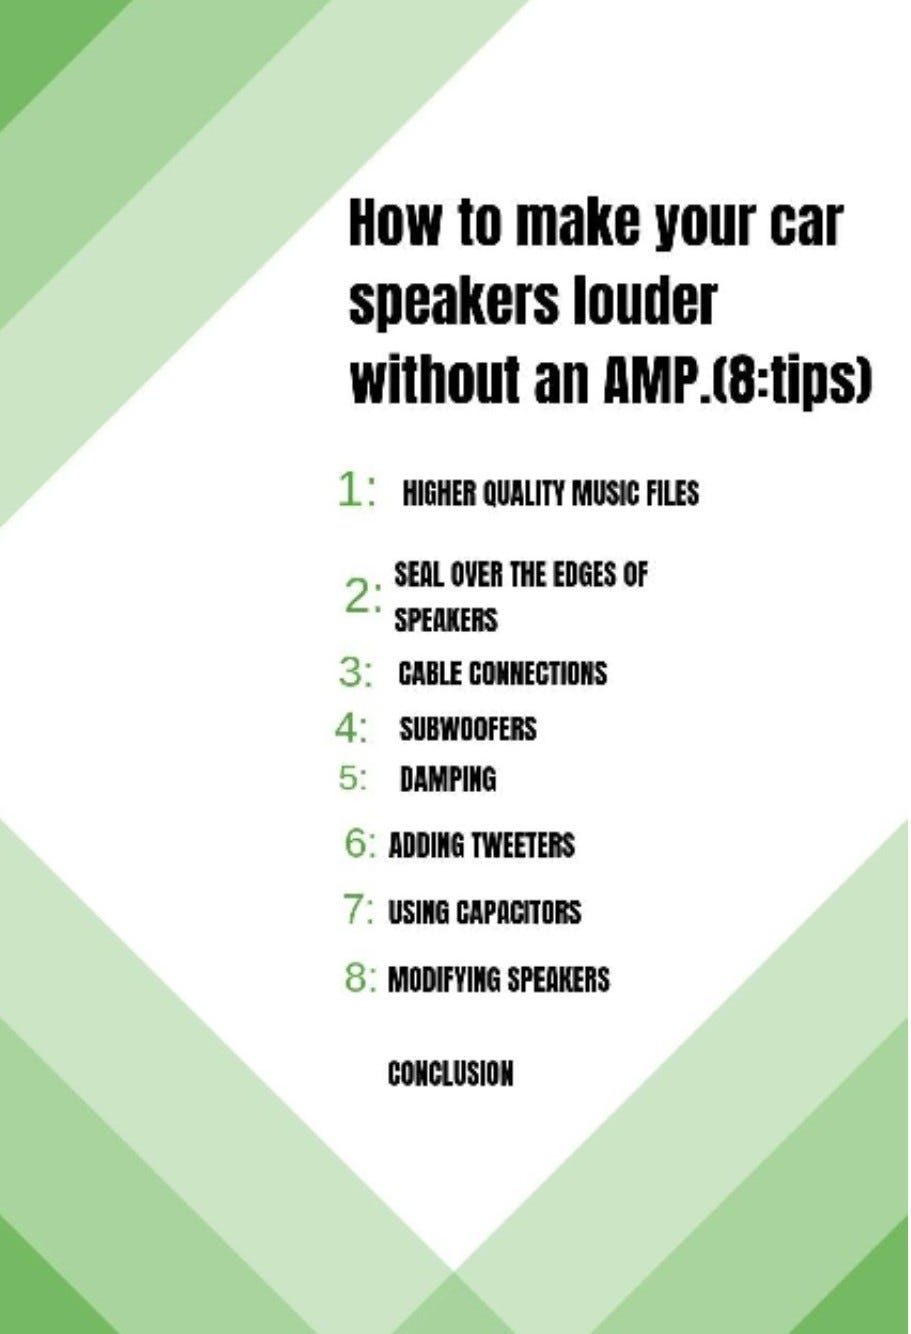 8 Tips to make your car speaker louder without an AMP | by Emama | Medium